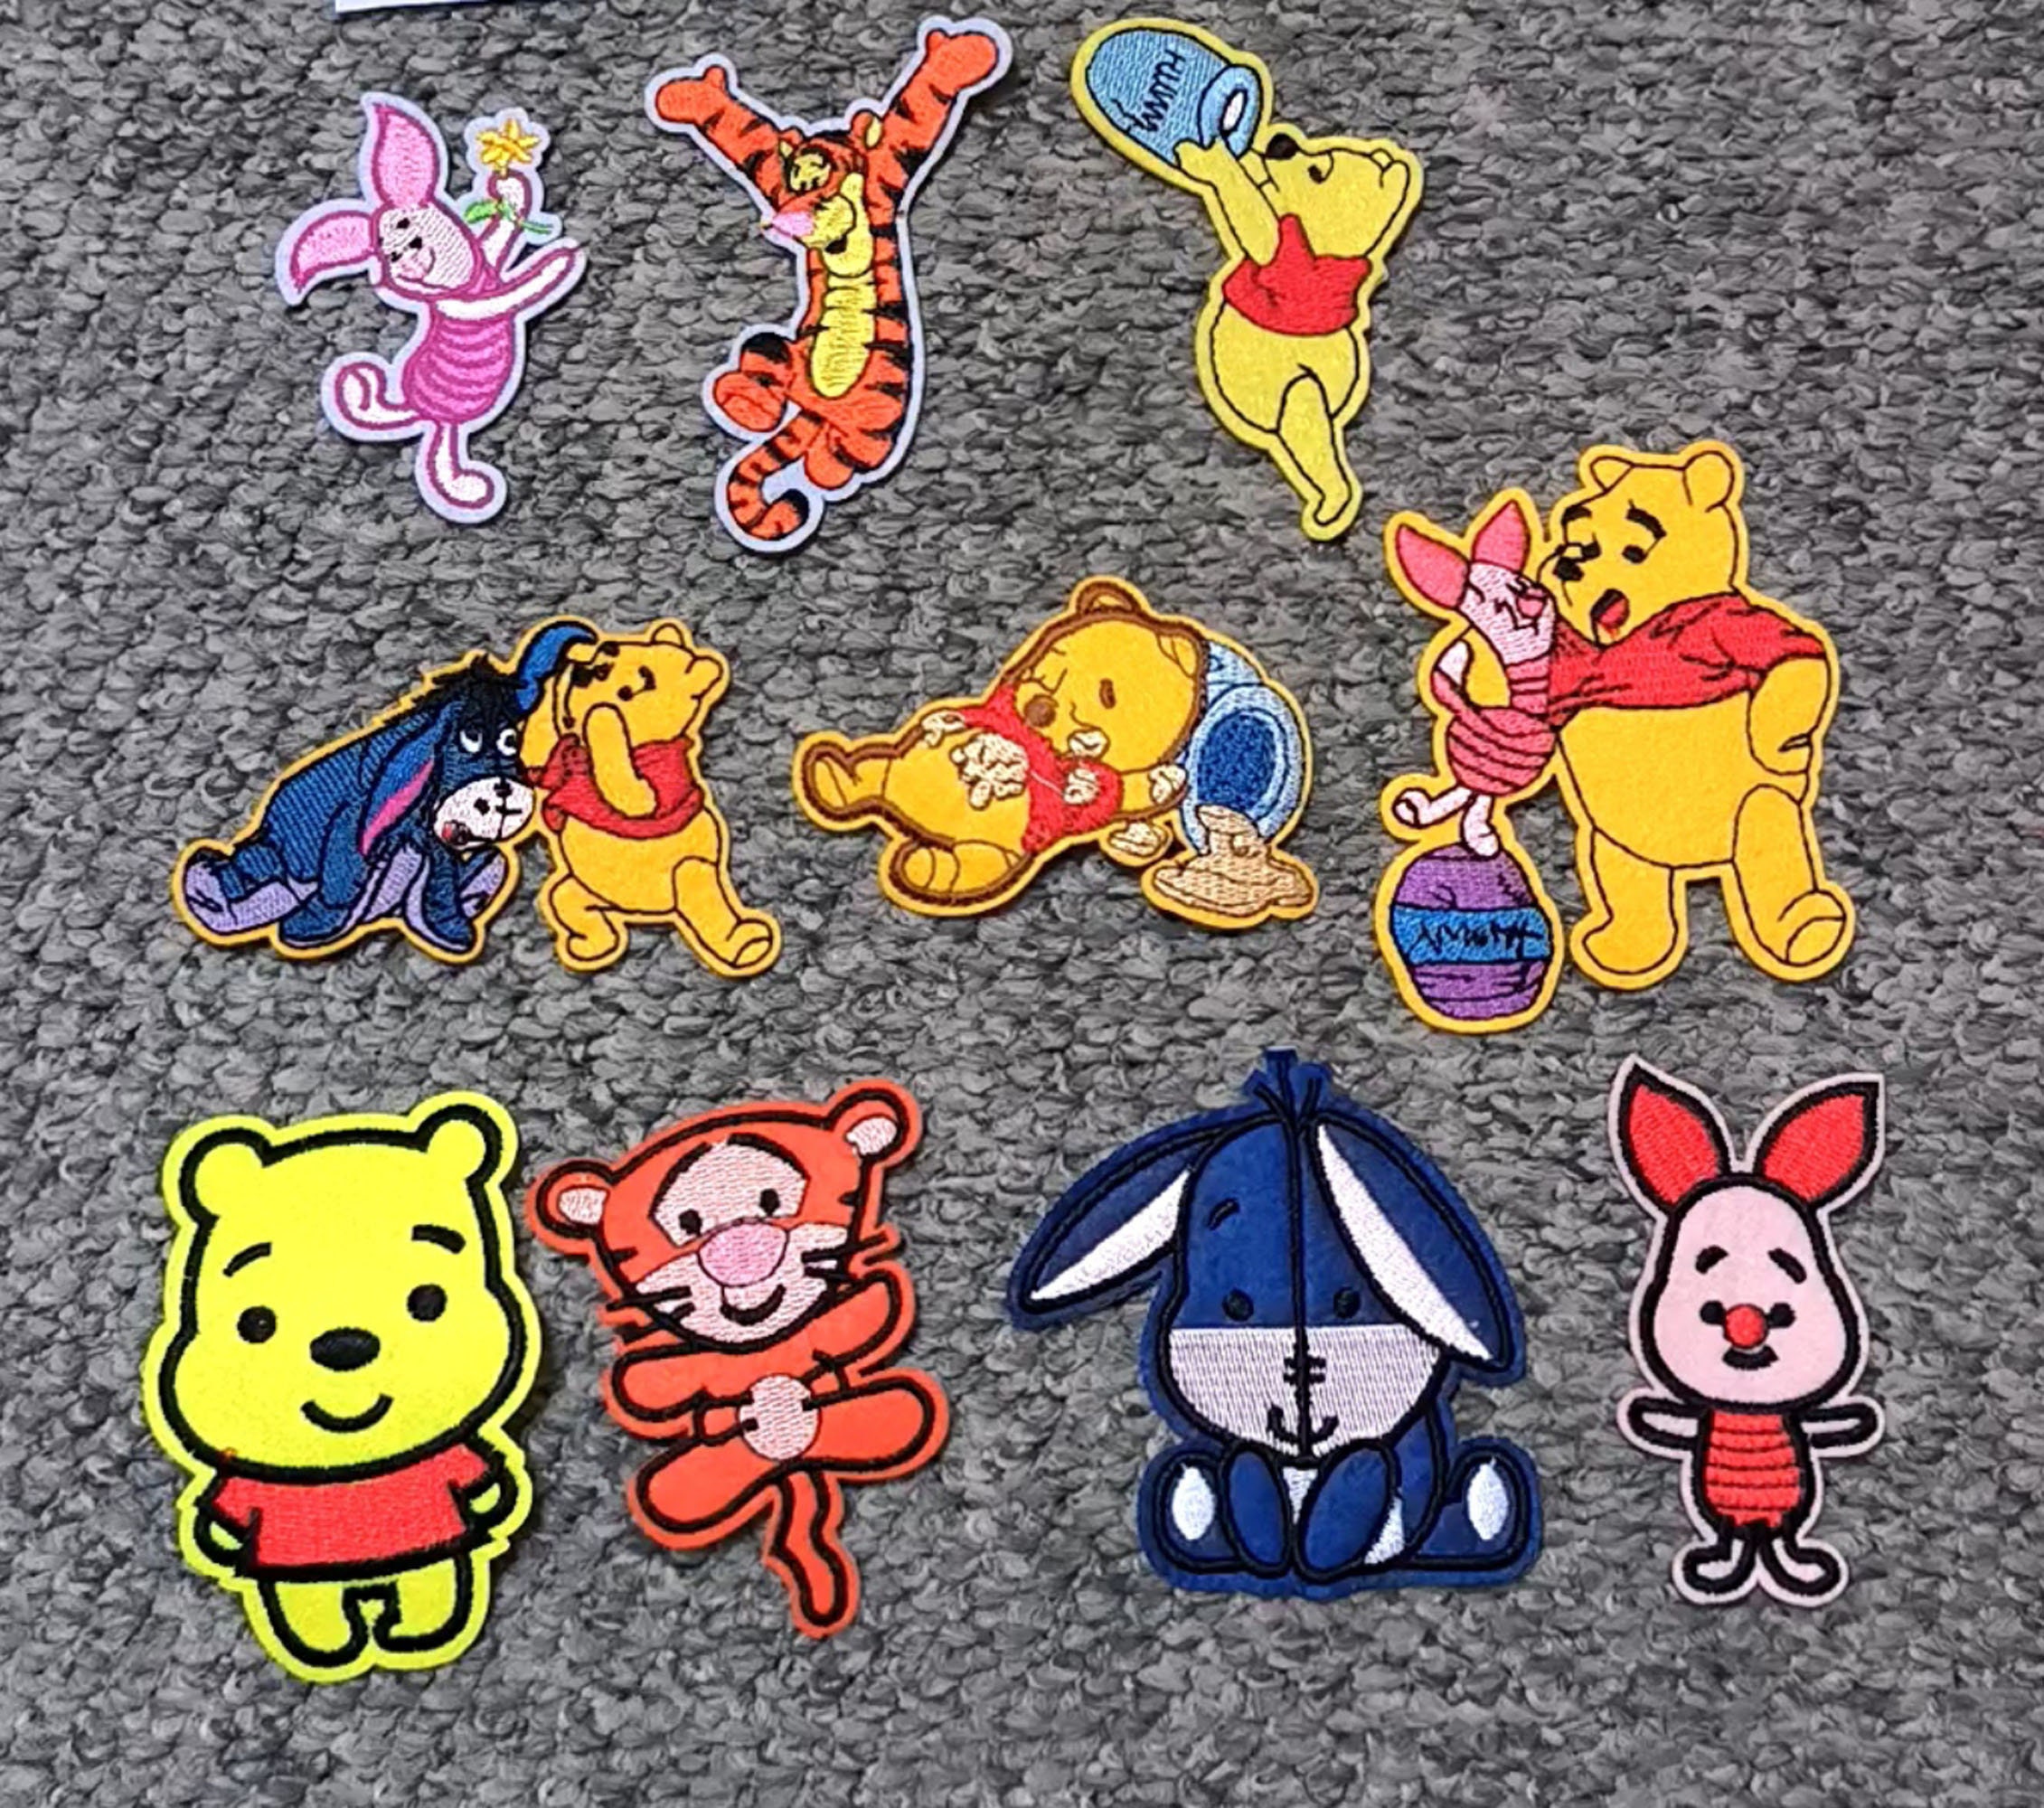 Iron on patches - WINNIE THE POOH HEART FRAME Disney - yellow - 7,5x5,8cm  - Application Embroided badges